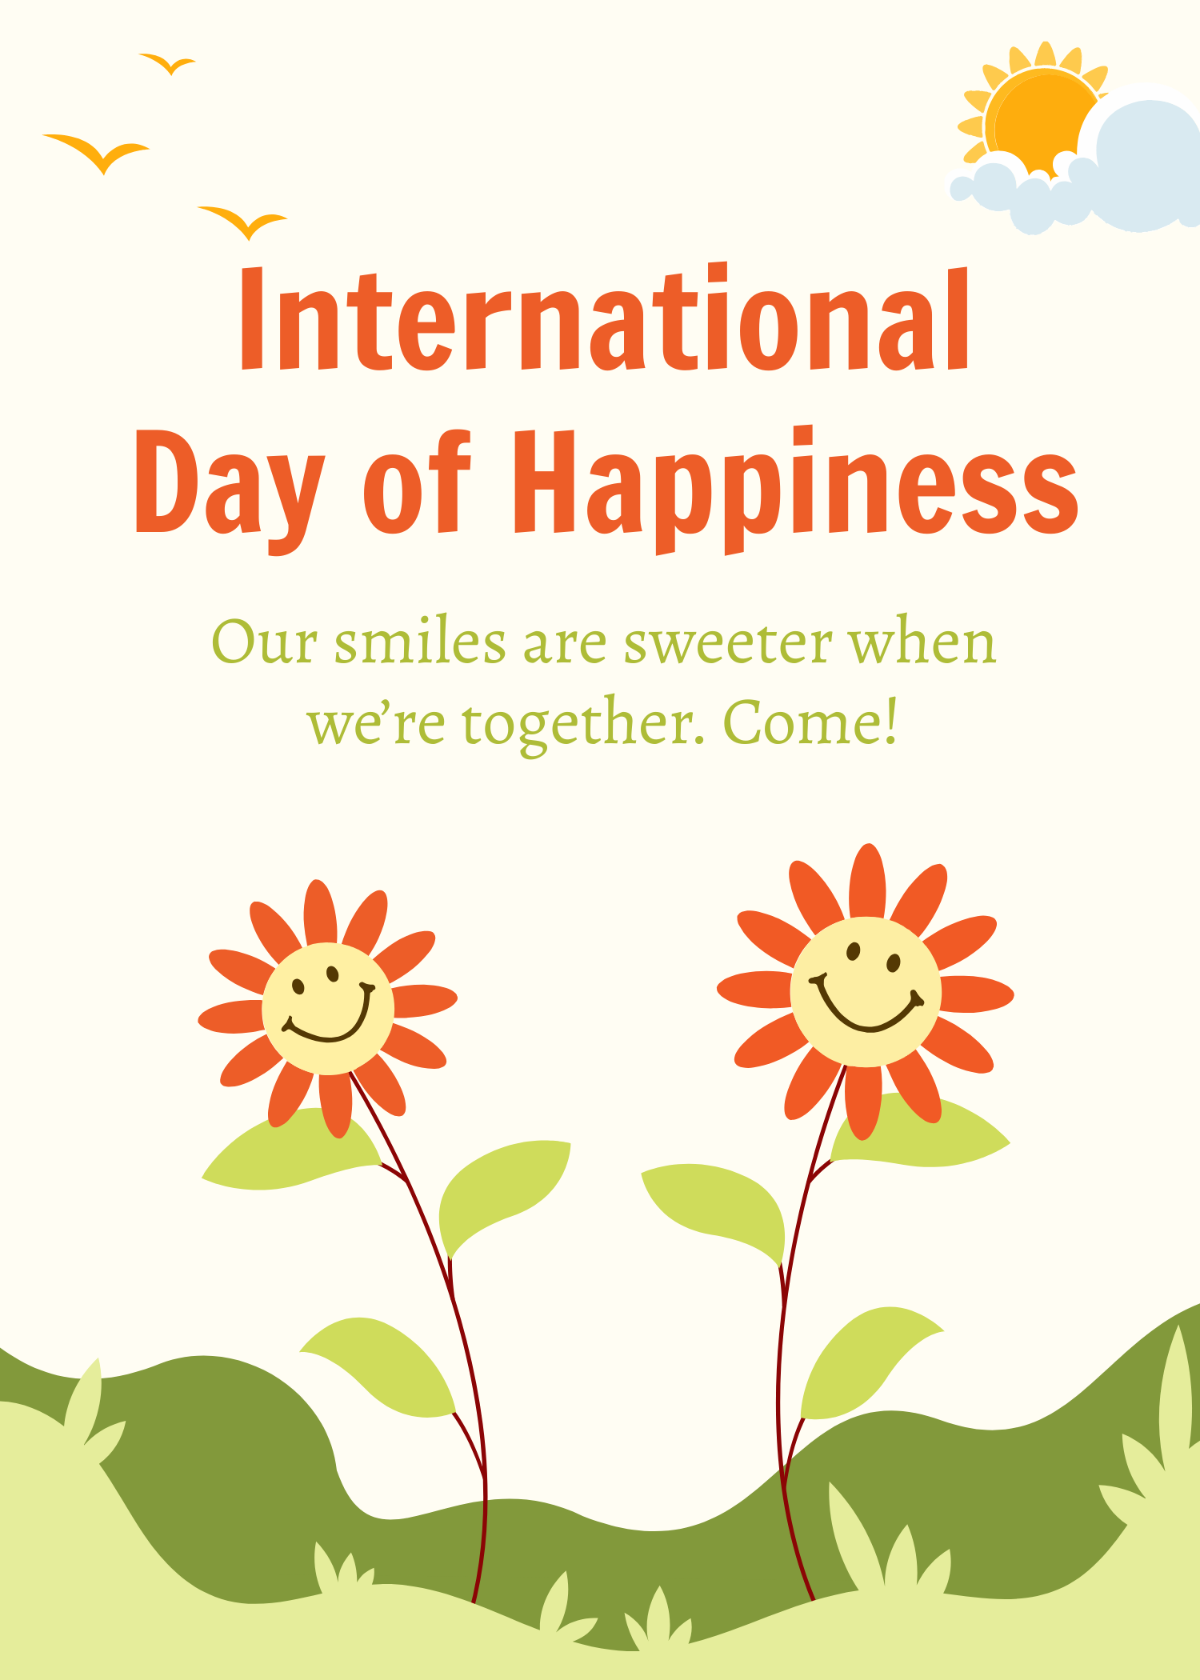 International Day of Happiness Invitation Card Template